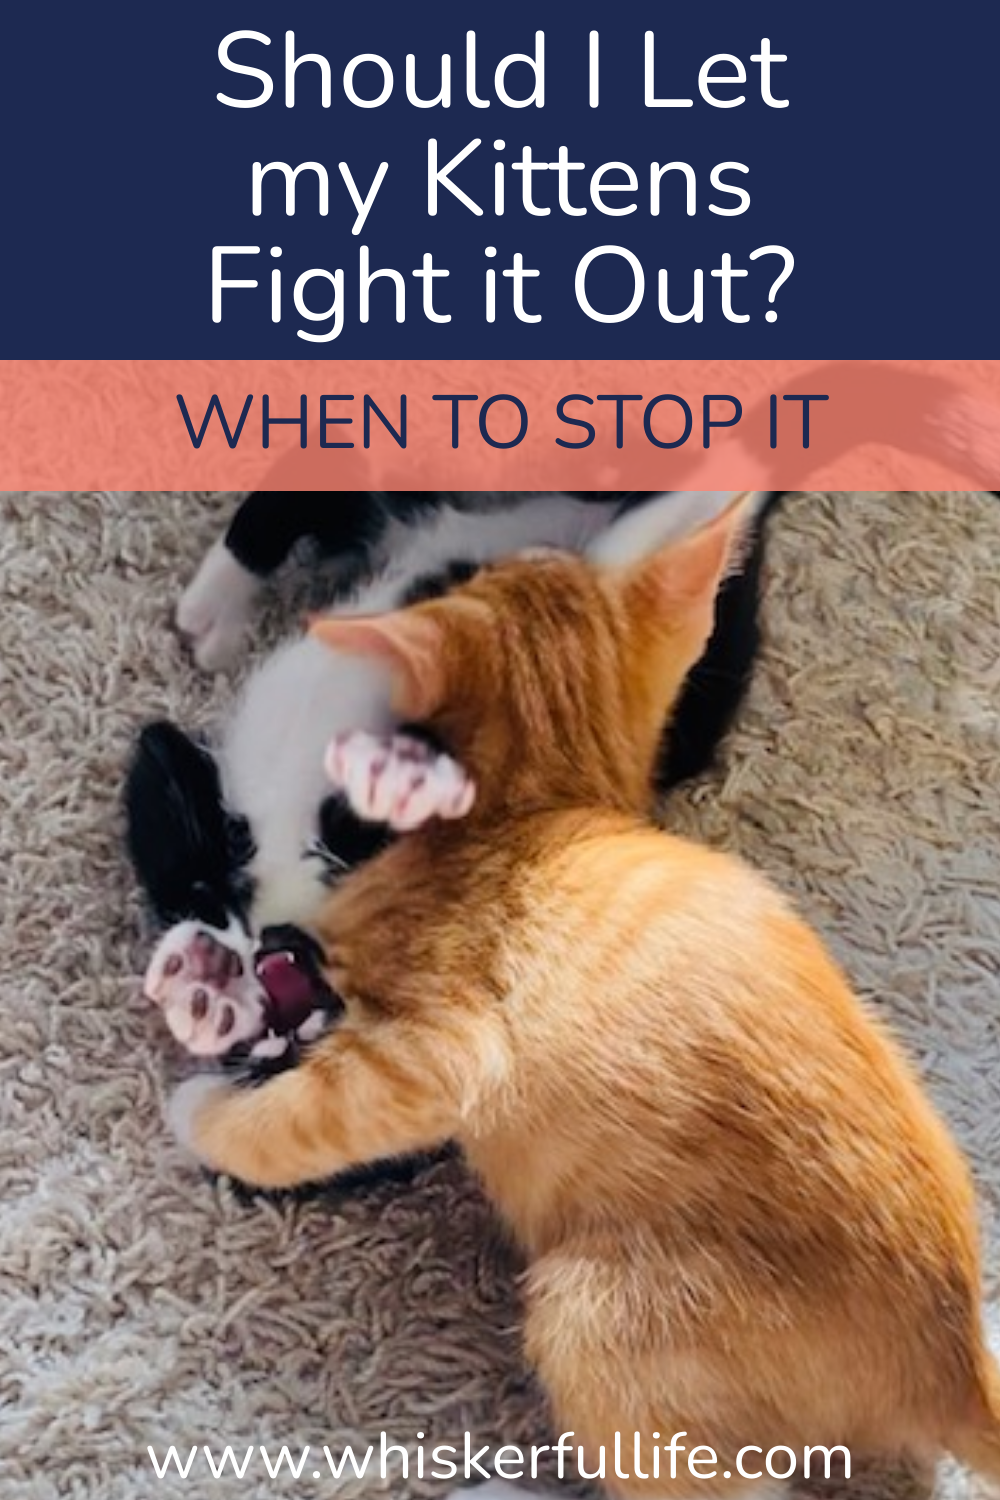 Should I Let my Kittens Fight it Out?